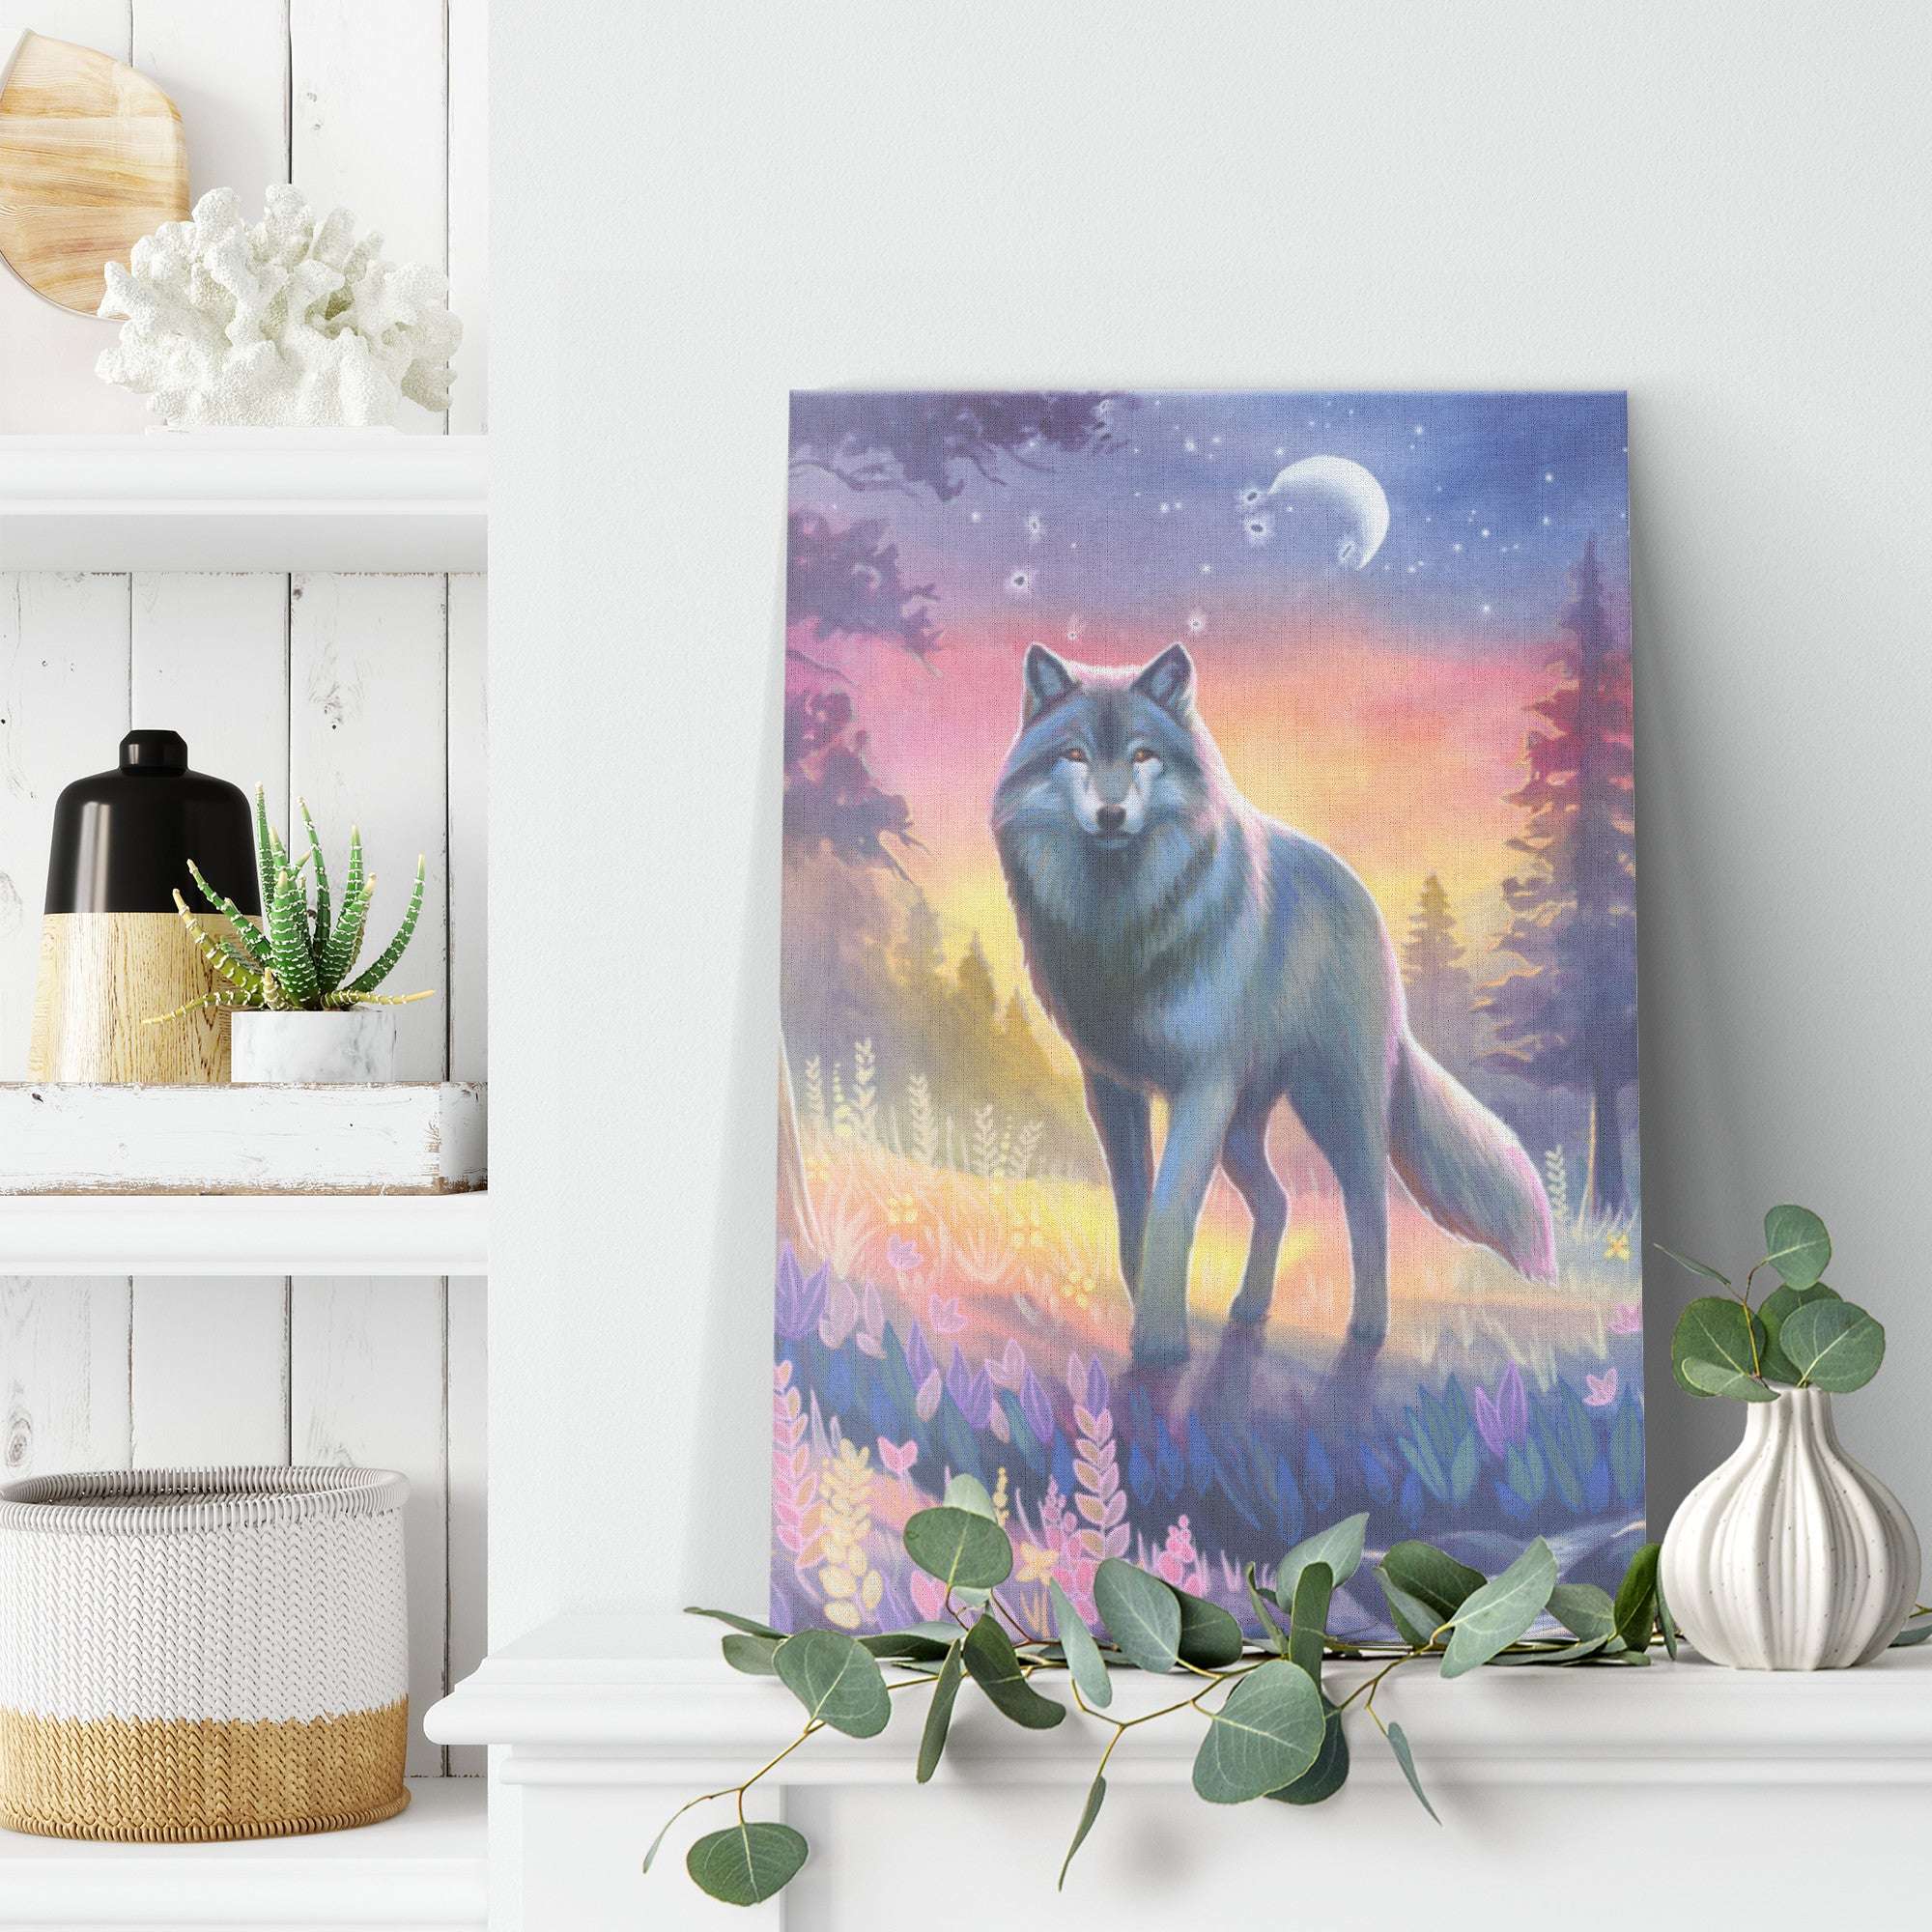 A Canvas Wolf Print of a wolf standing in a forest at twilight, with a colorful sky and the moon above, displayed on a white shelf in a cozy room decor.